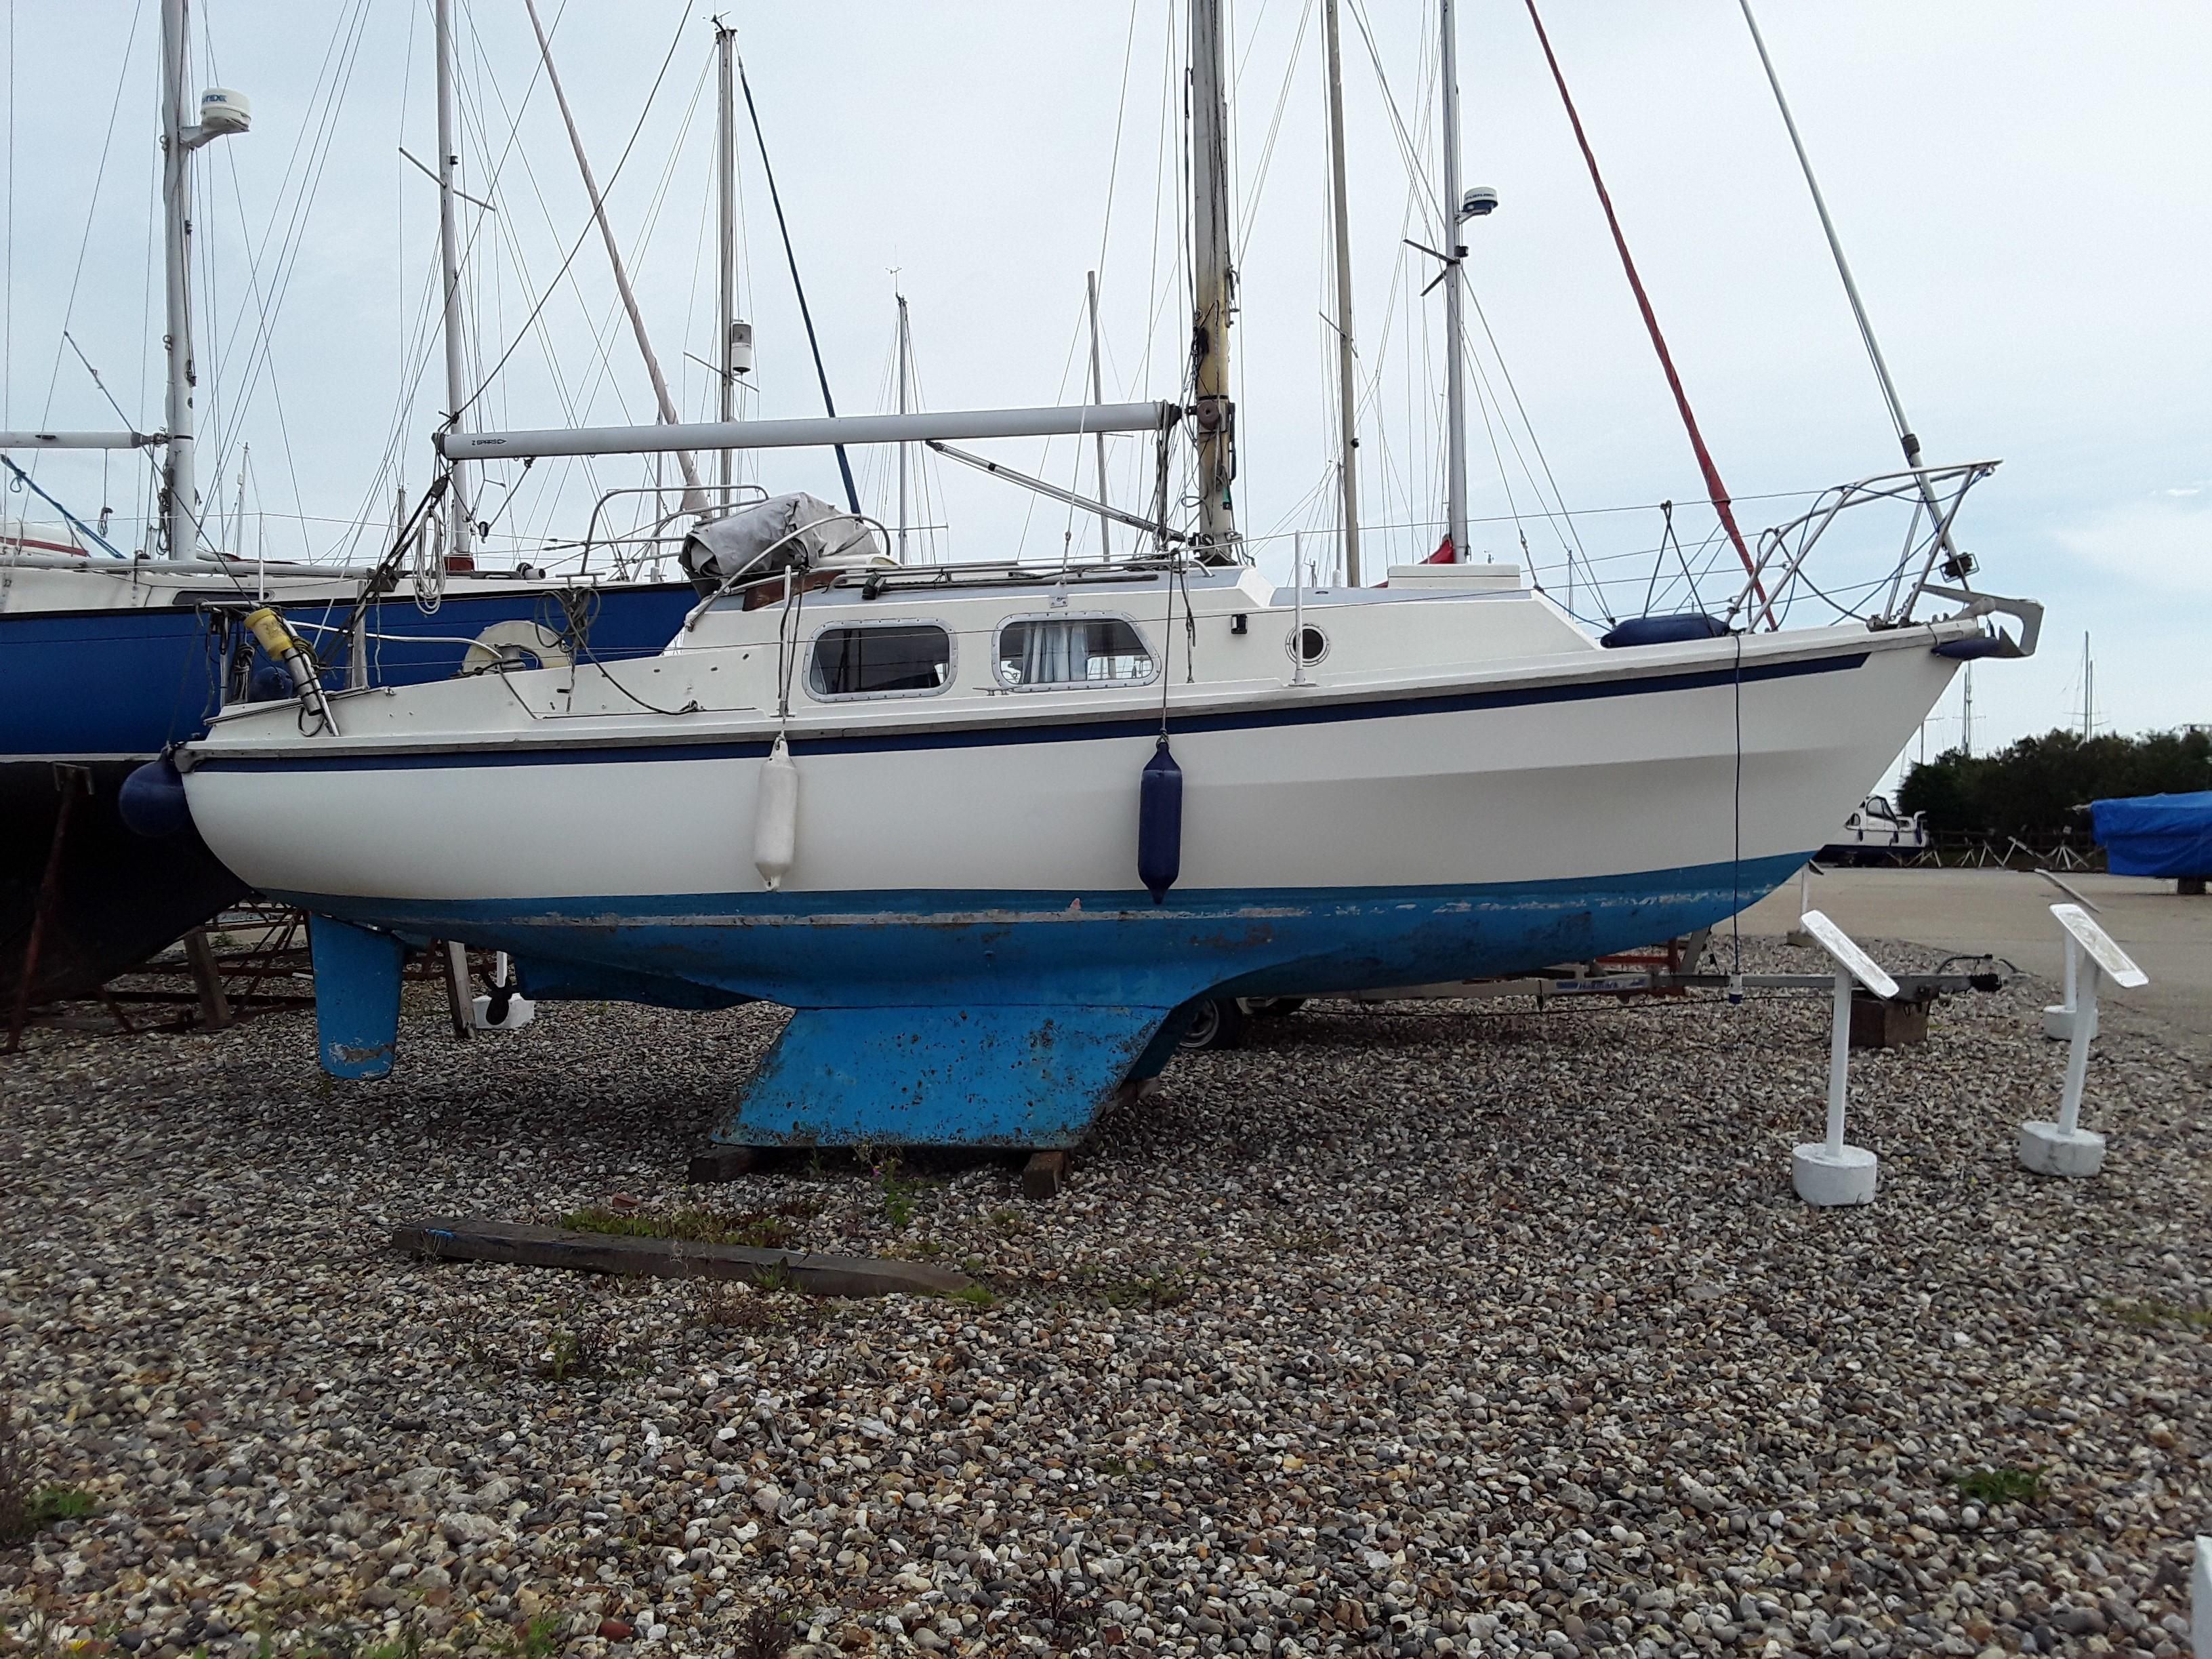 1972 Westerly Centaur Sail New and Used Boats for Sale - www.yachtworld.co.uk